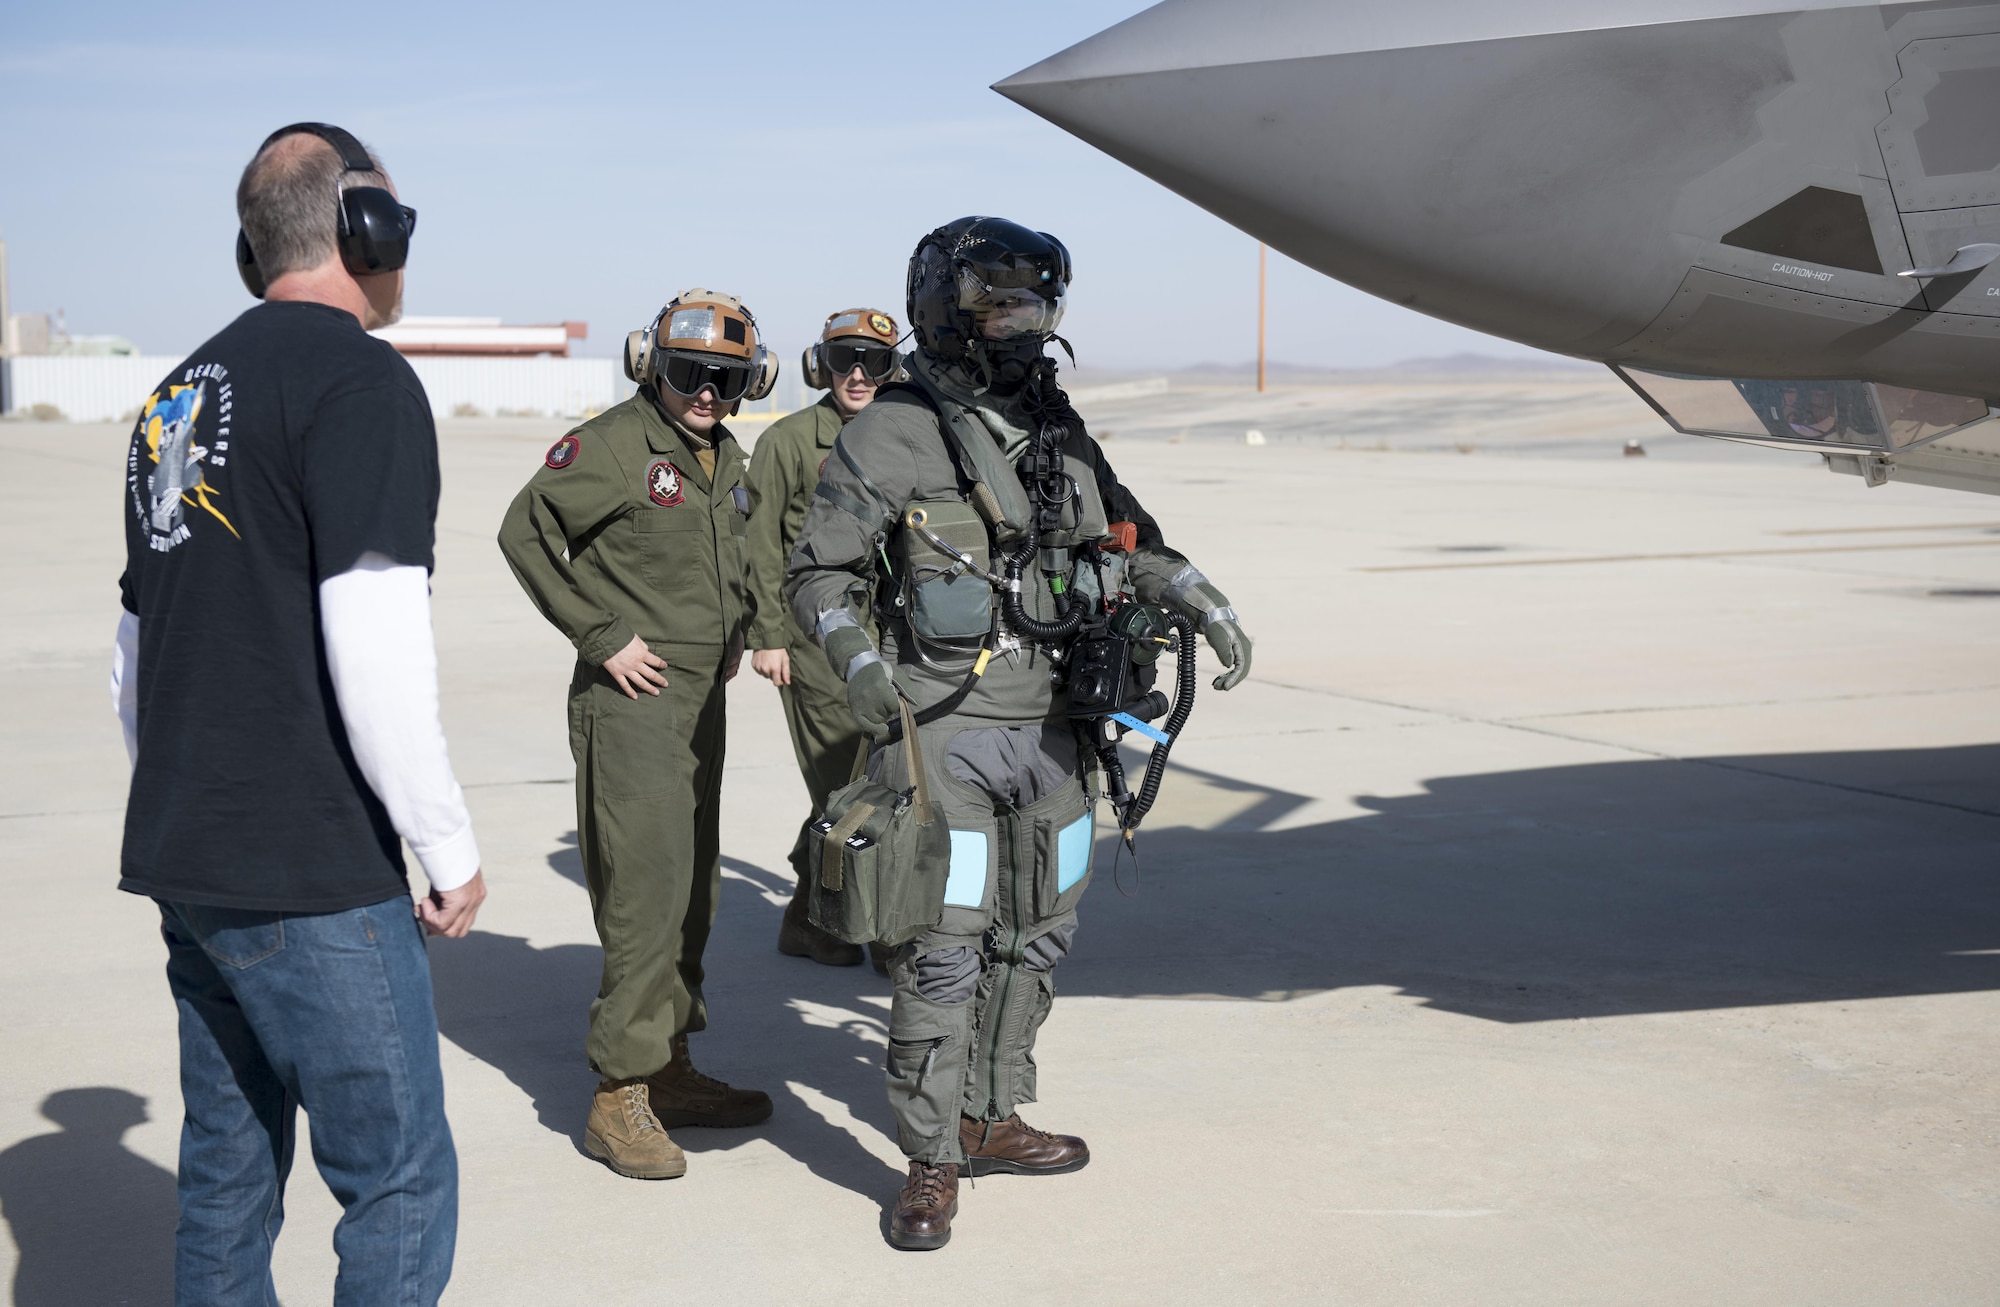 Marine Corps Maj. Aaron Frey (center) prepares to board a Marine F-35B Joint Strike Fighter in a chemical/biological ensemble. All components of the CB ensemble are in addition to the pilot’s sleeved flight jacket and G suit. (U.S. Air Force photo by Brad White)